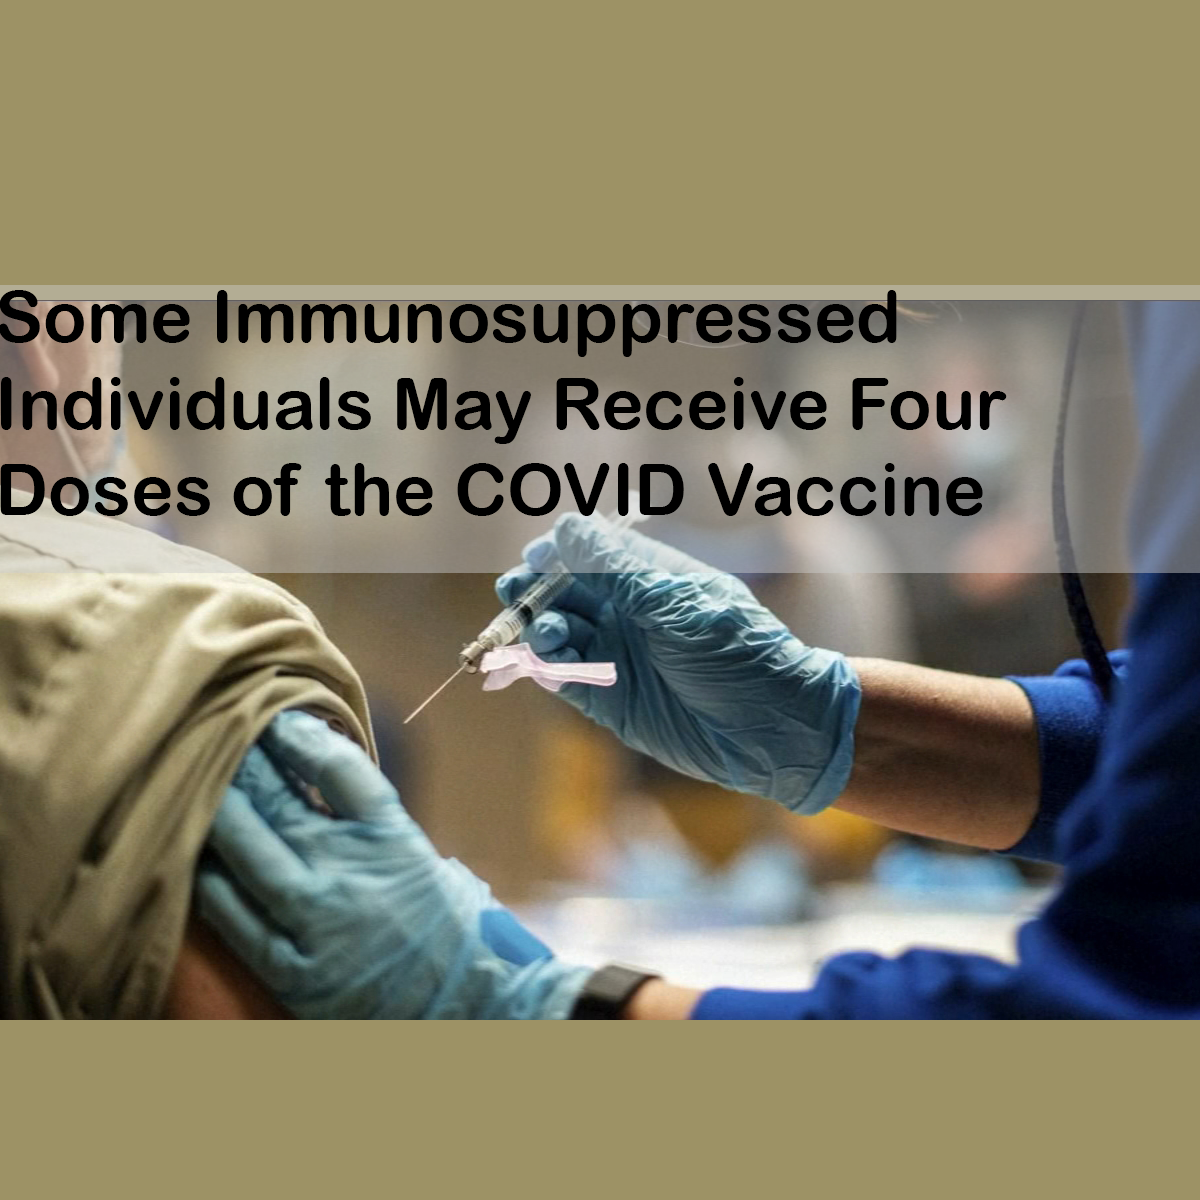 Some Immunosuppressed Individuals May Receive Four Doses of the COVID Vaccine